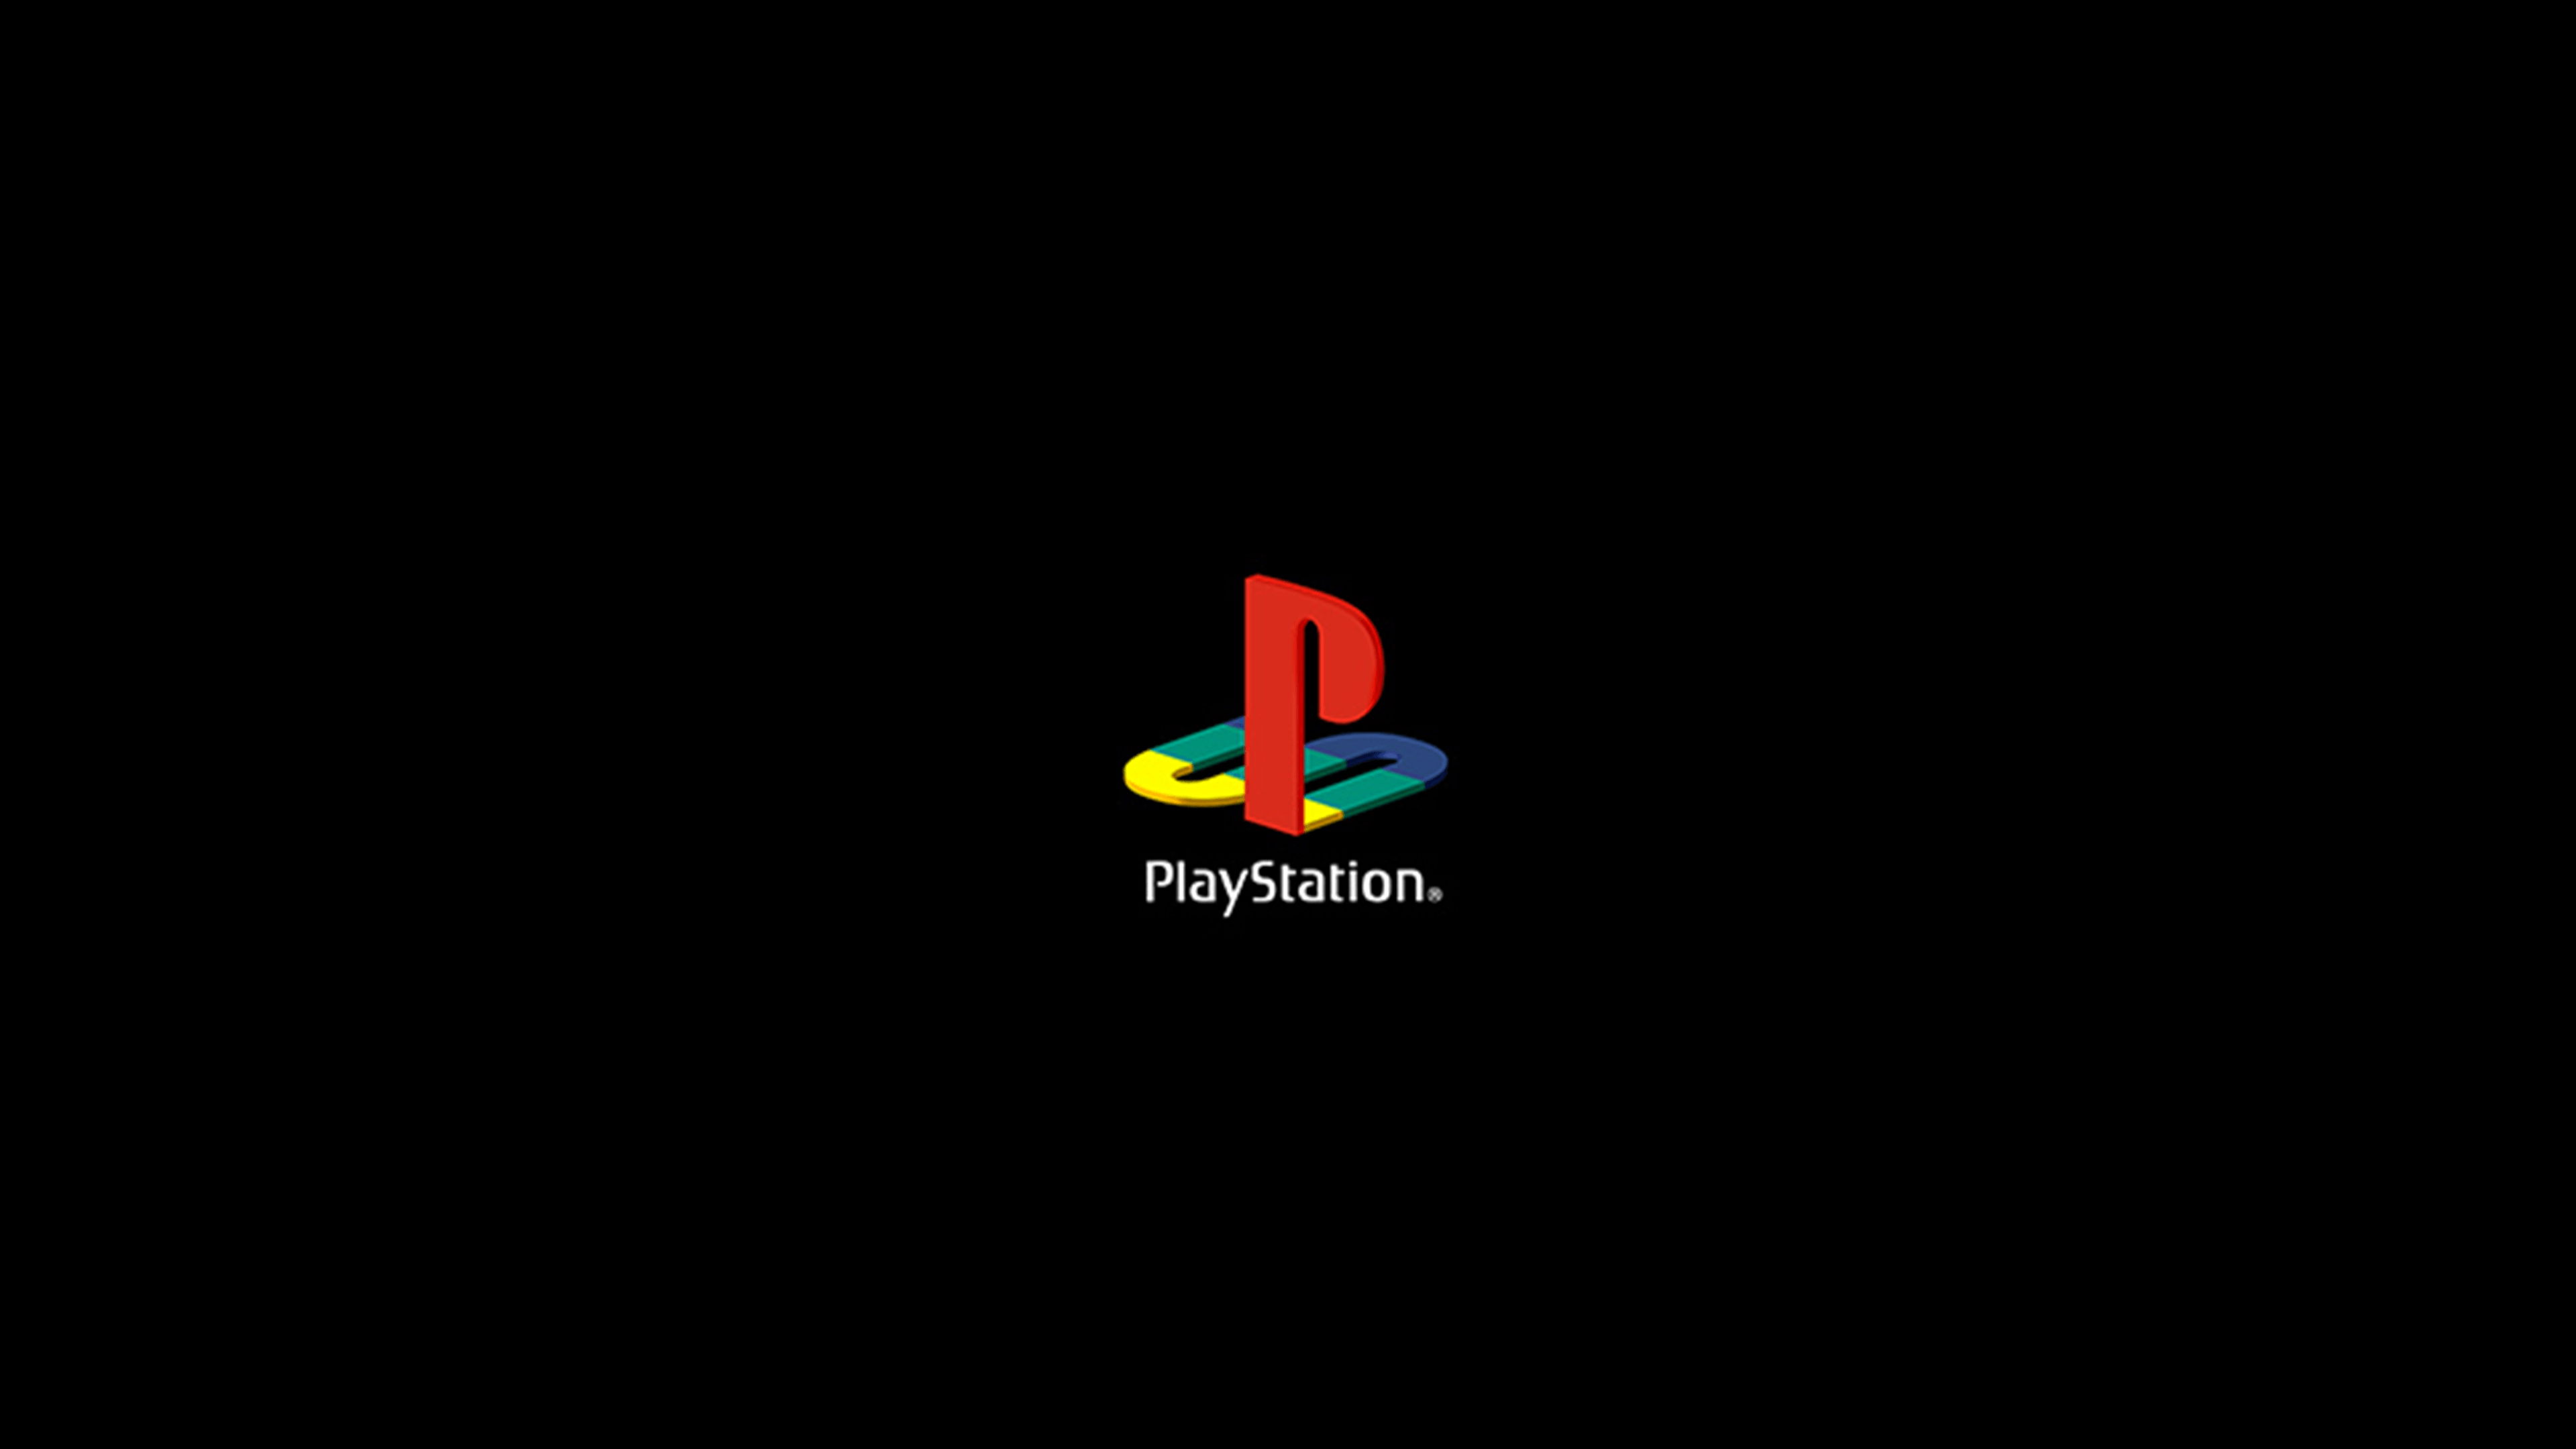 Playstation 4K wallpapers for your desktop or mobile screen free and easy  to download